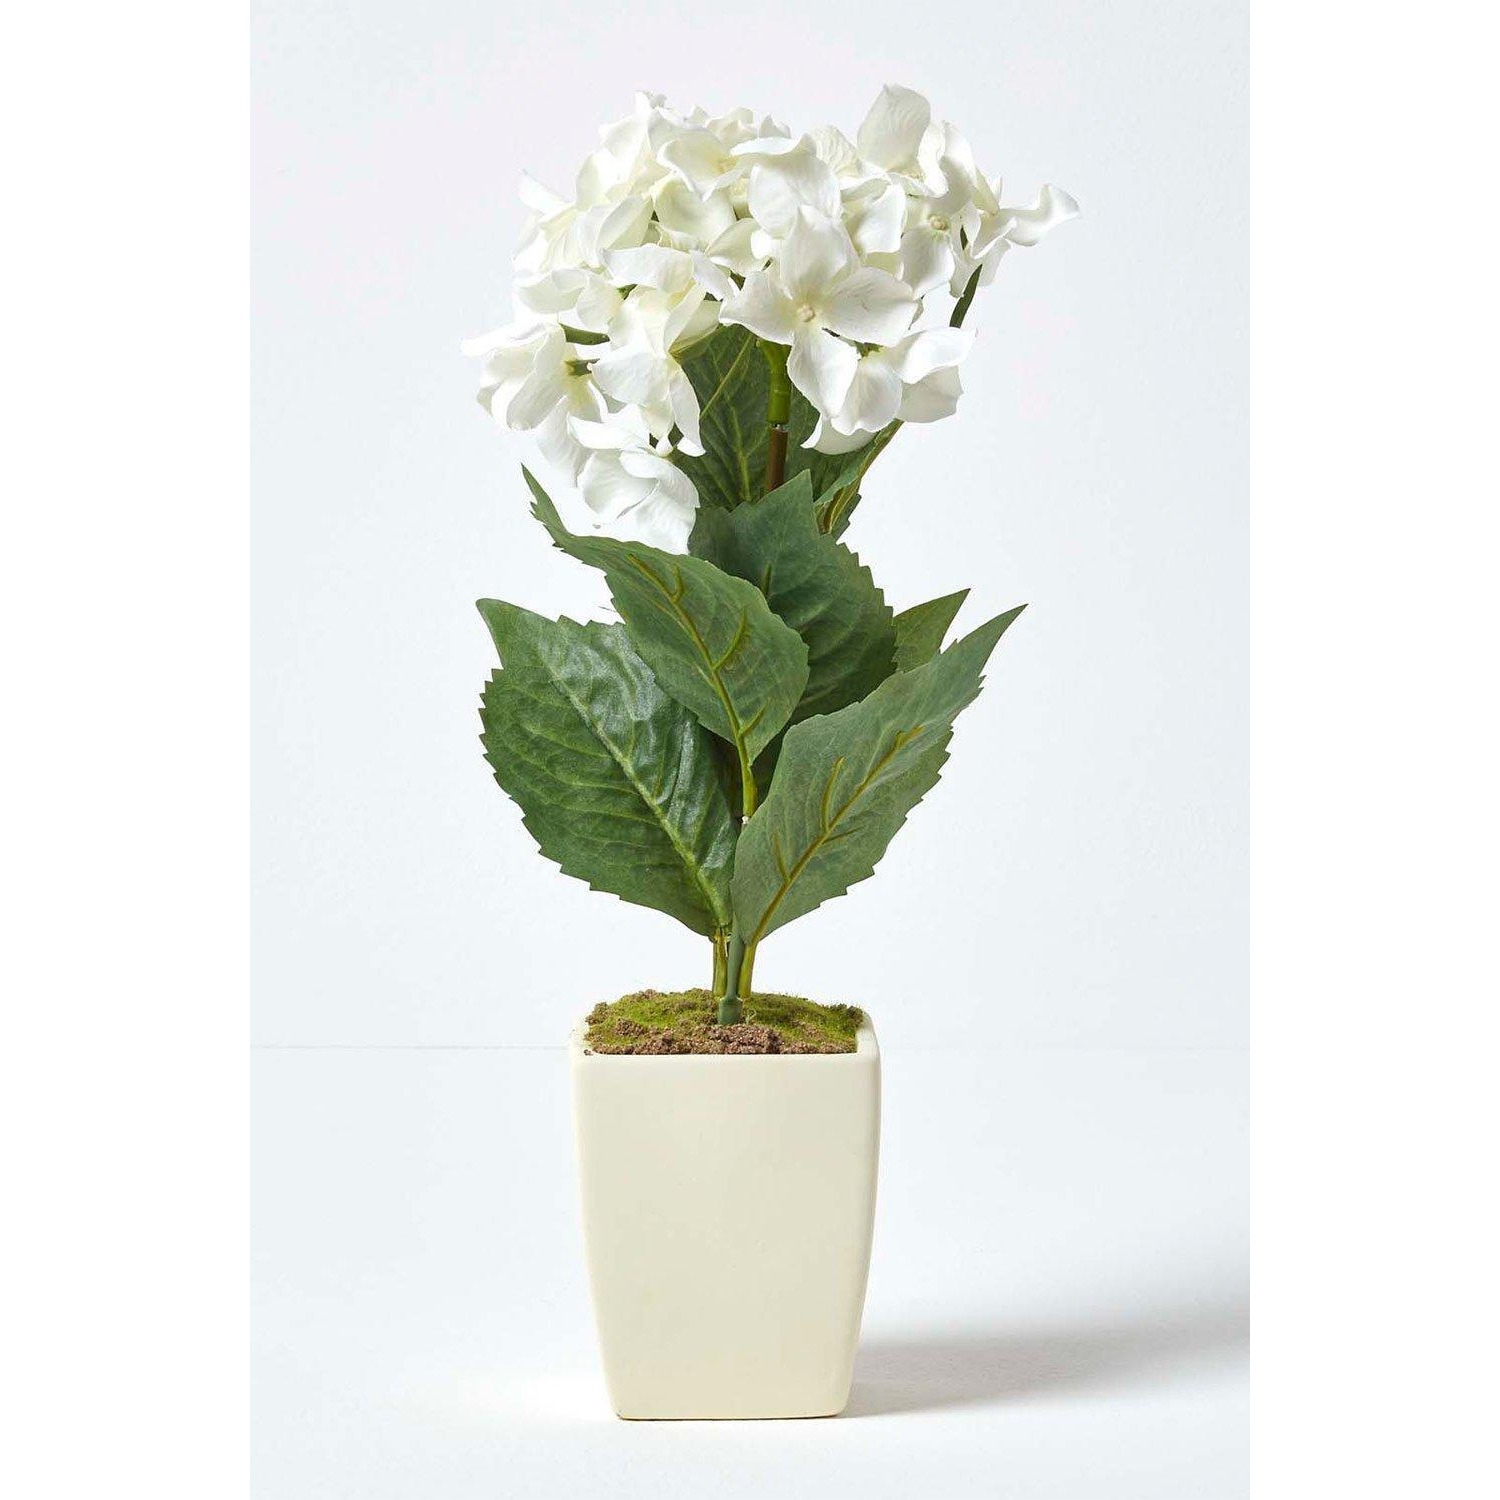 Small Artificial Hydrangea Flower in Pot, 38 cm Tall - image 1